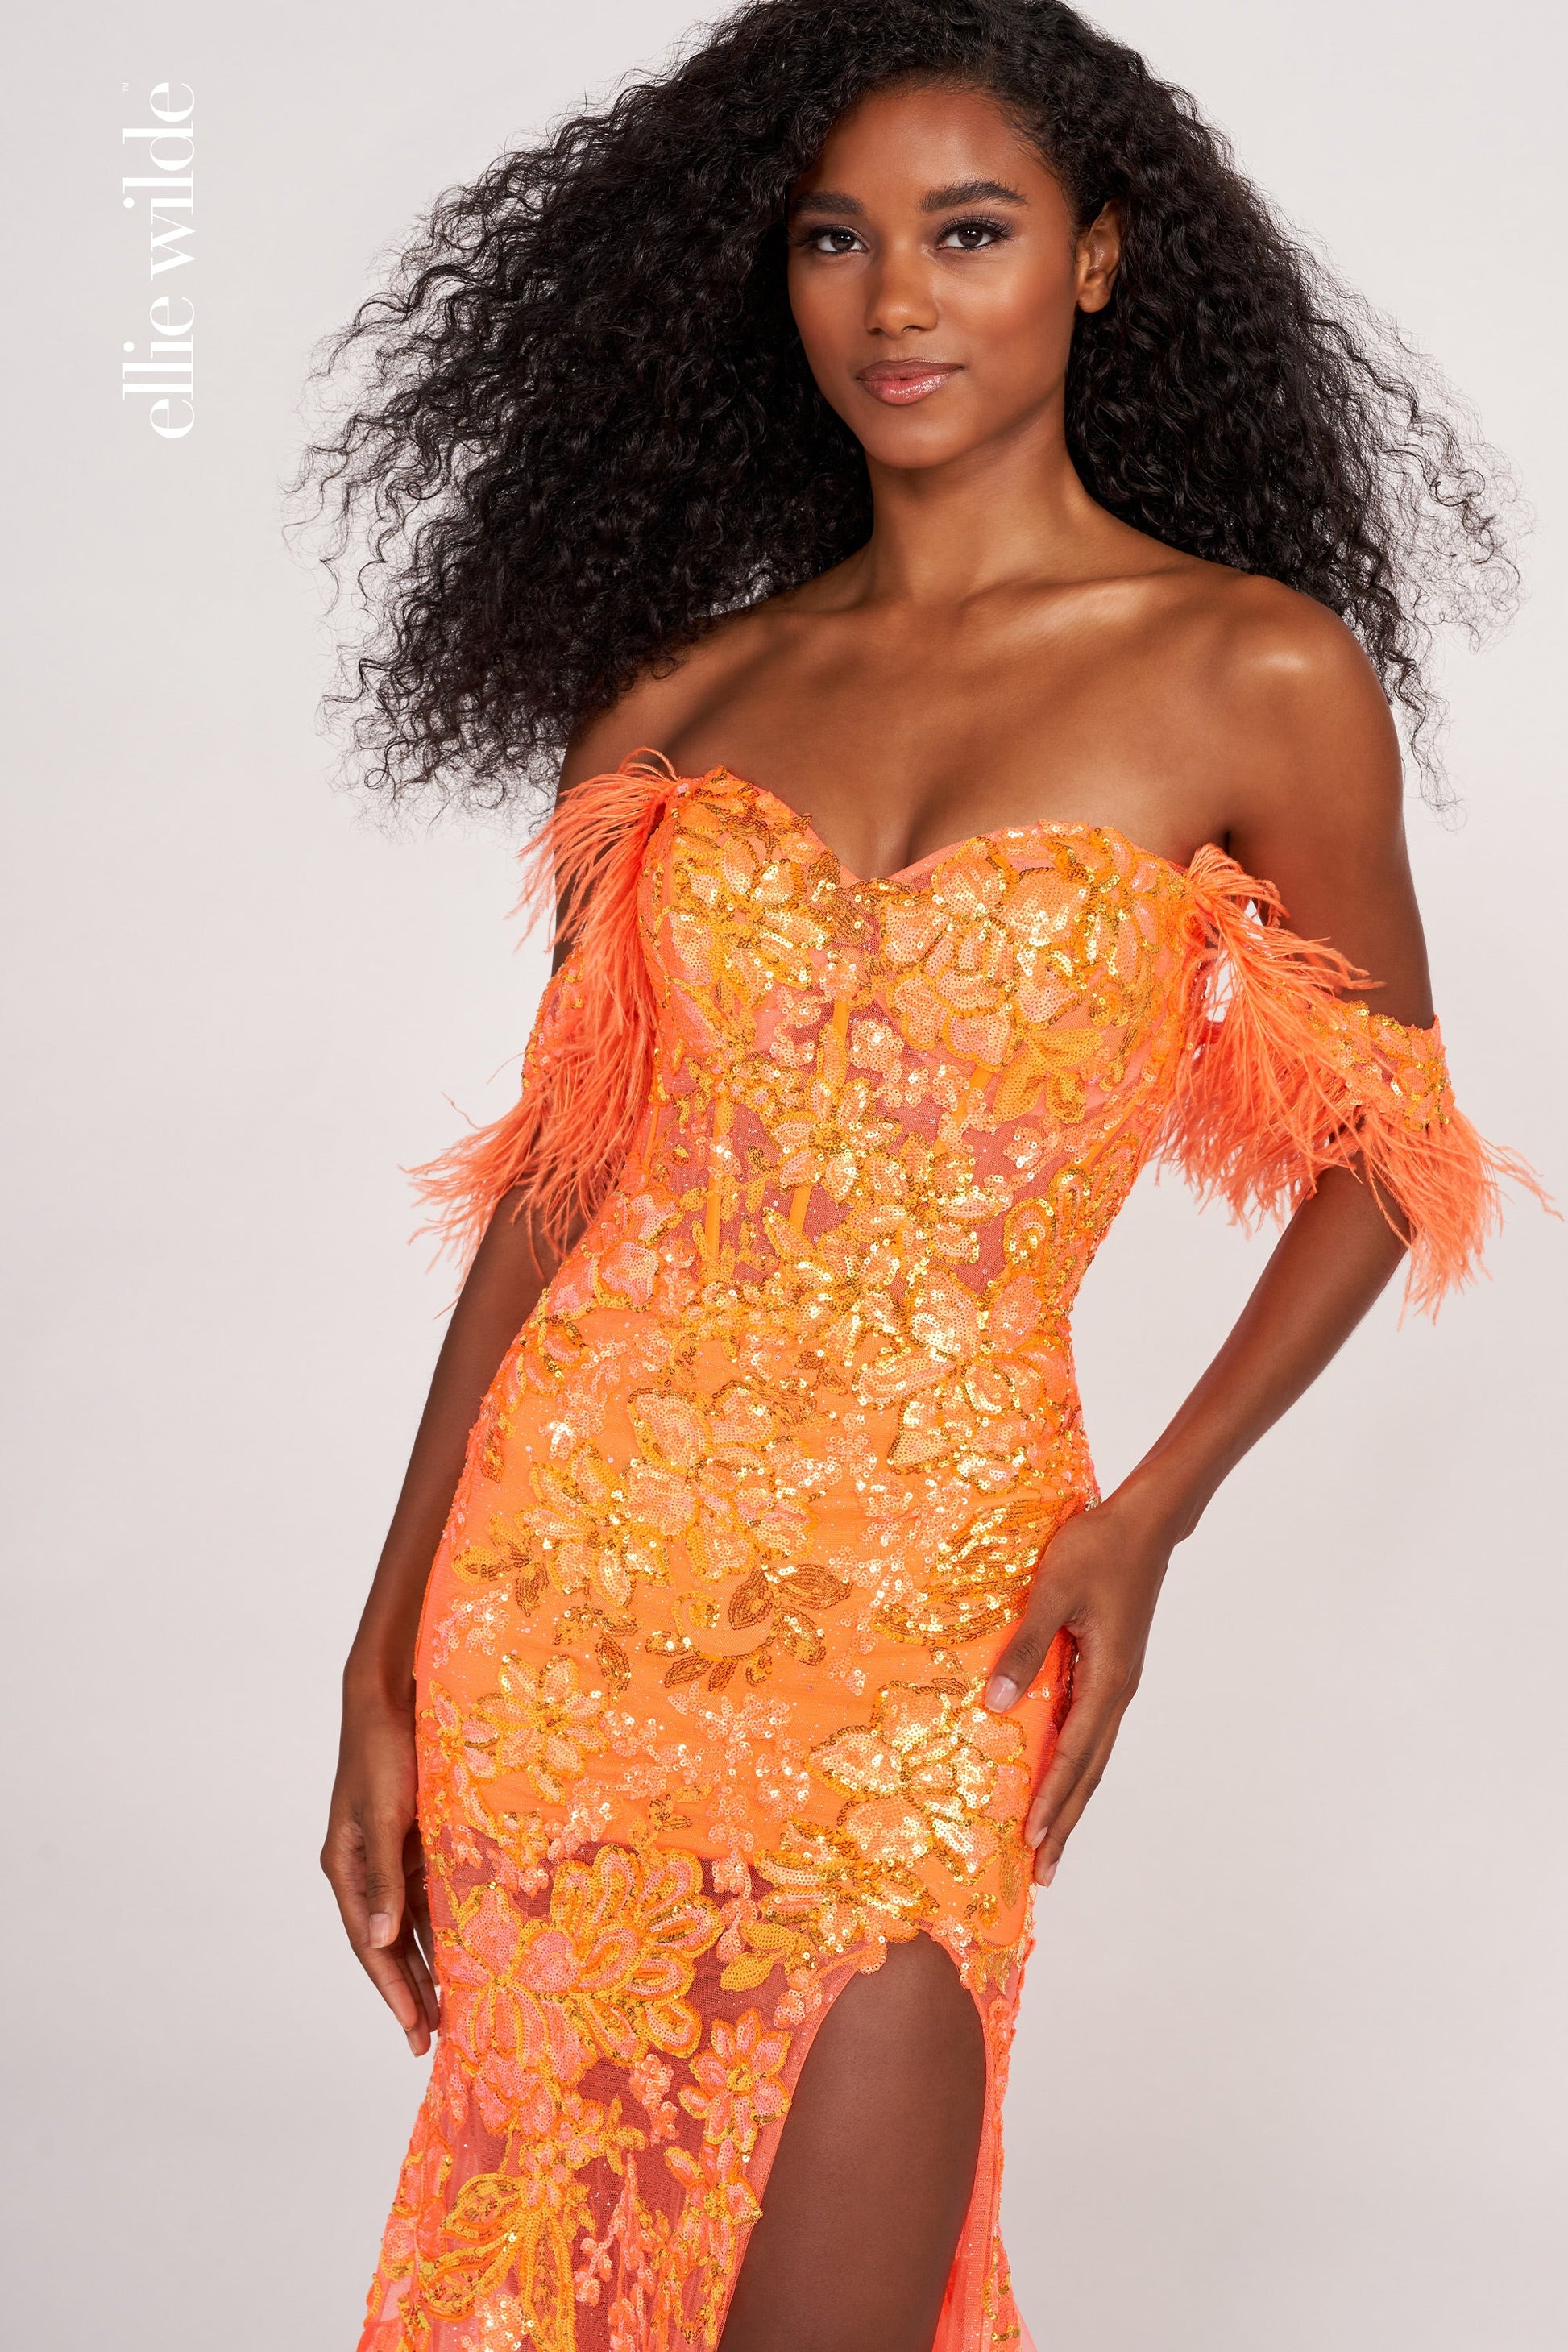 The Ellie Wilde EW34034 is a glamorous formal gown featuring an off-the-shoulder neckline, corset bodice, and a full-length sheer sequin skirt with a side slit. Festooned with a beautiful feather trim, this dress is sure to make a statement.  Sizes: 00-16  Colors: ORANGE, ROYAL BLUE, LILAC, HOT PINK, SAPPHIRE, SKY BLUE, EMERALD, PURPLE RAIN